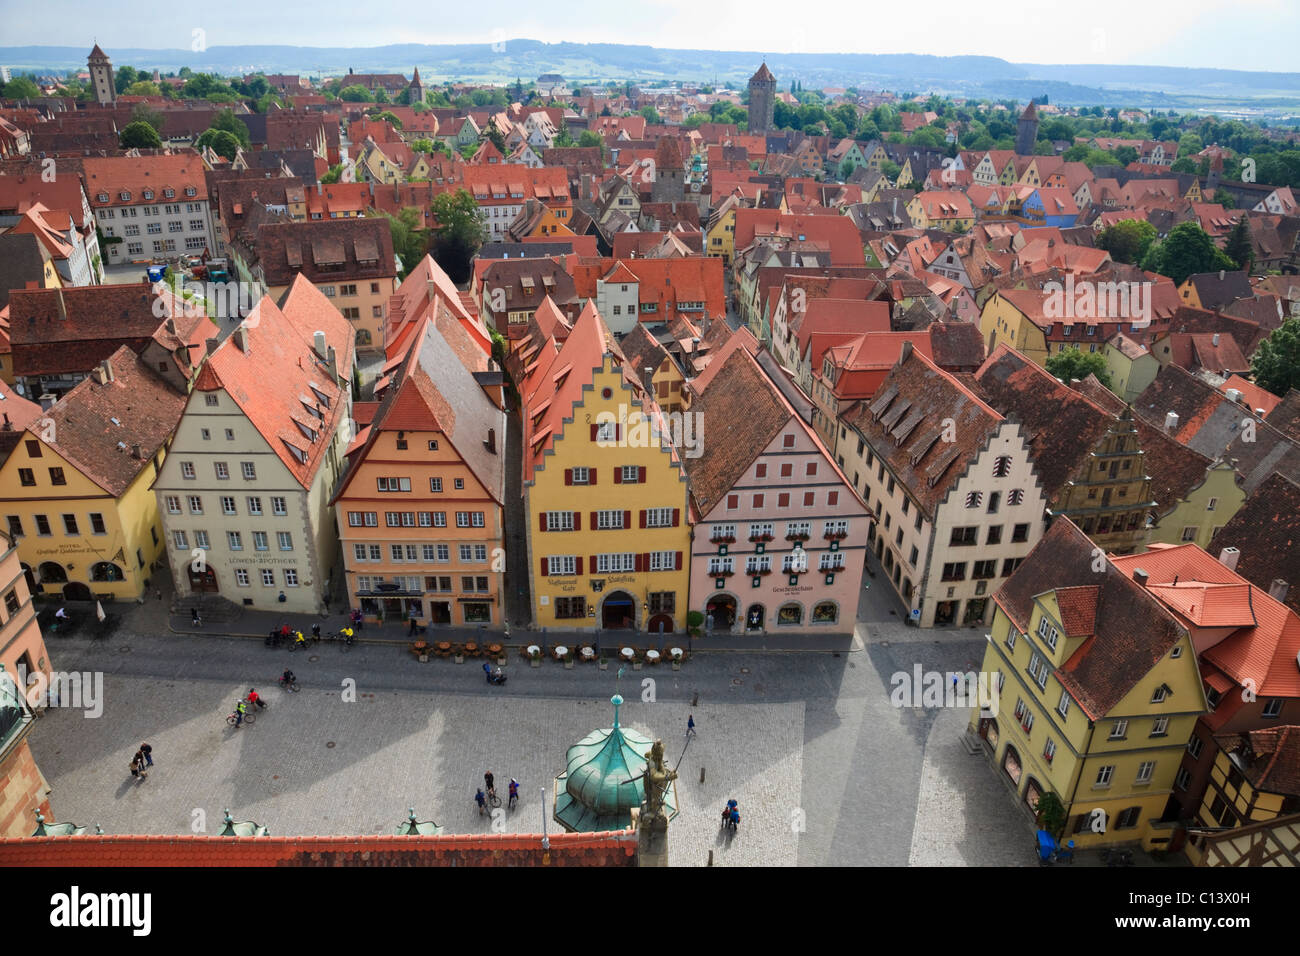 Aerial view of rooftops from Town Hall (Rathaus) tower in old town on Romantic Road. Rothenburg Ob der Tauber Bavaria Germany. Stock Photo